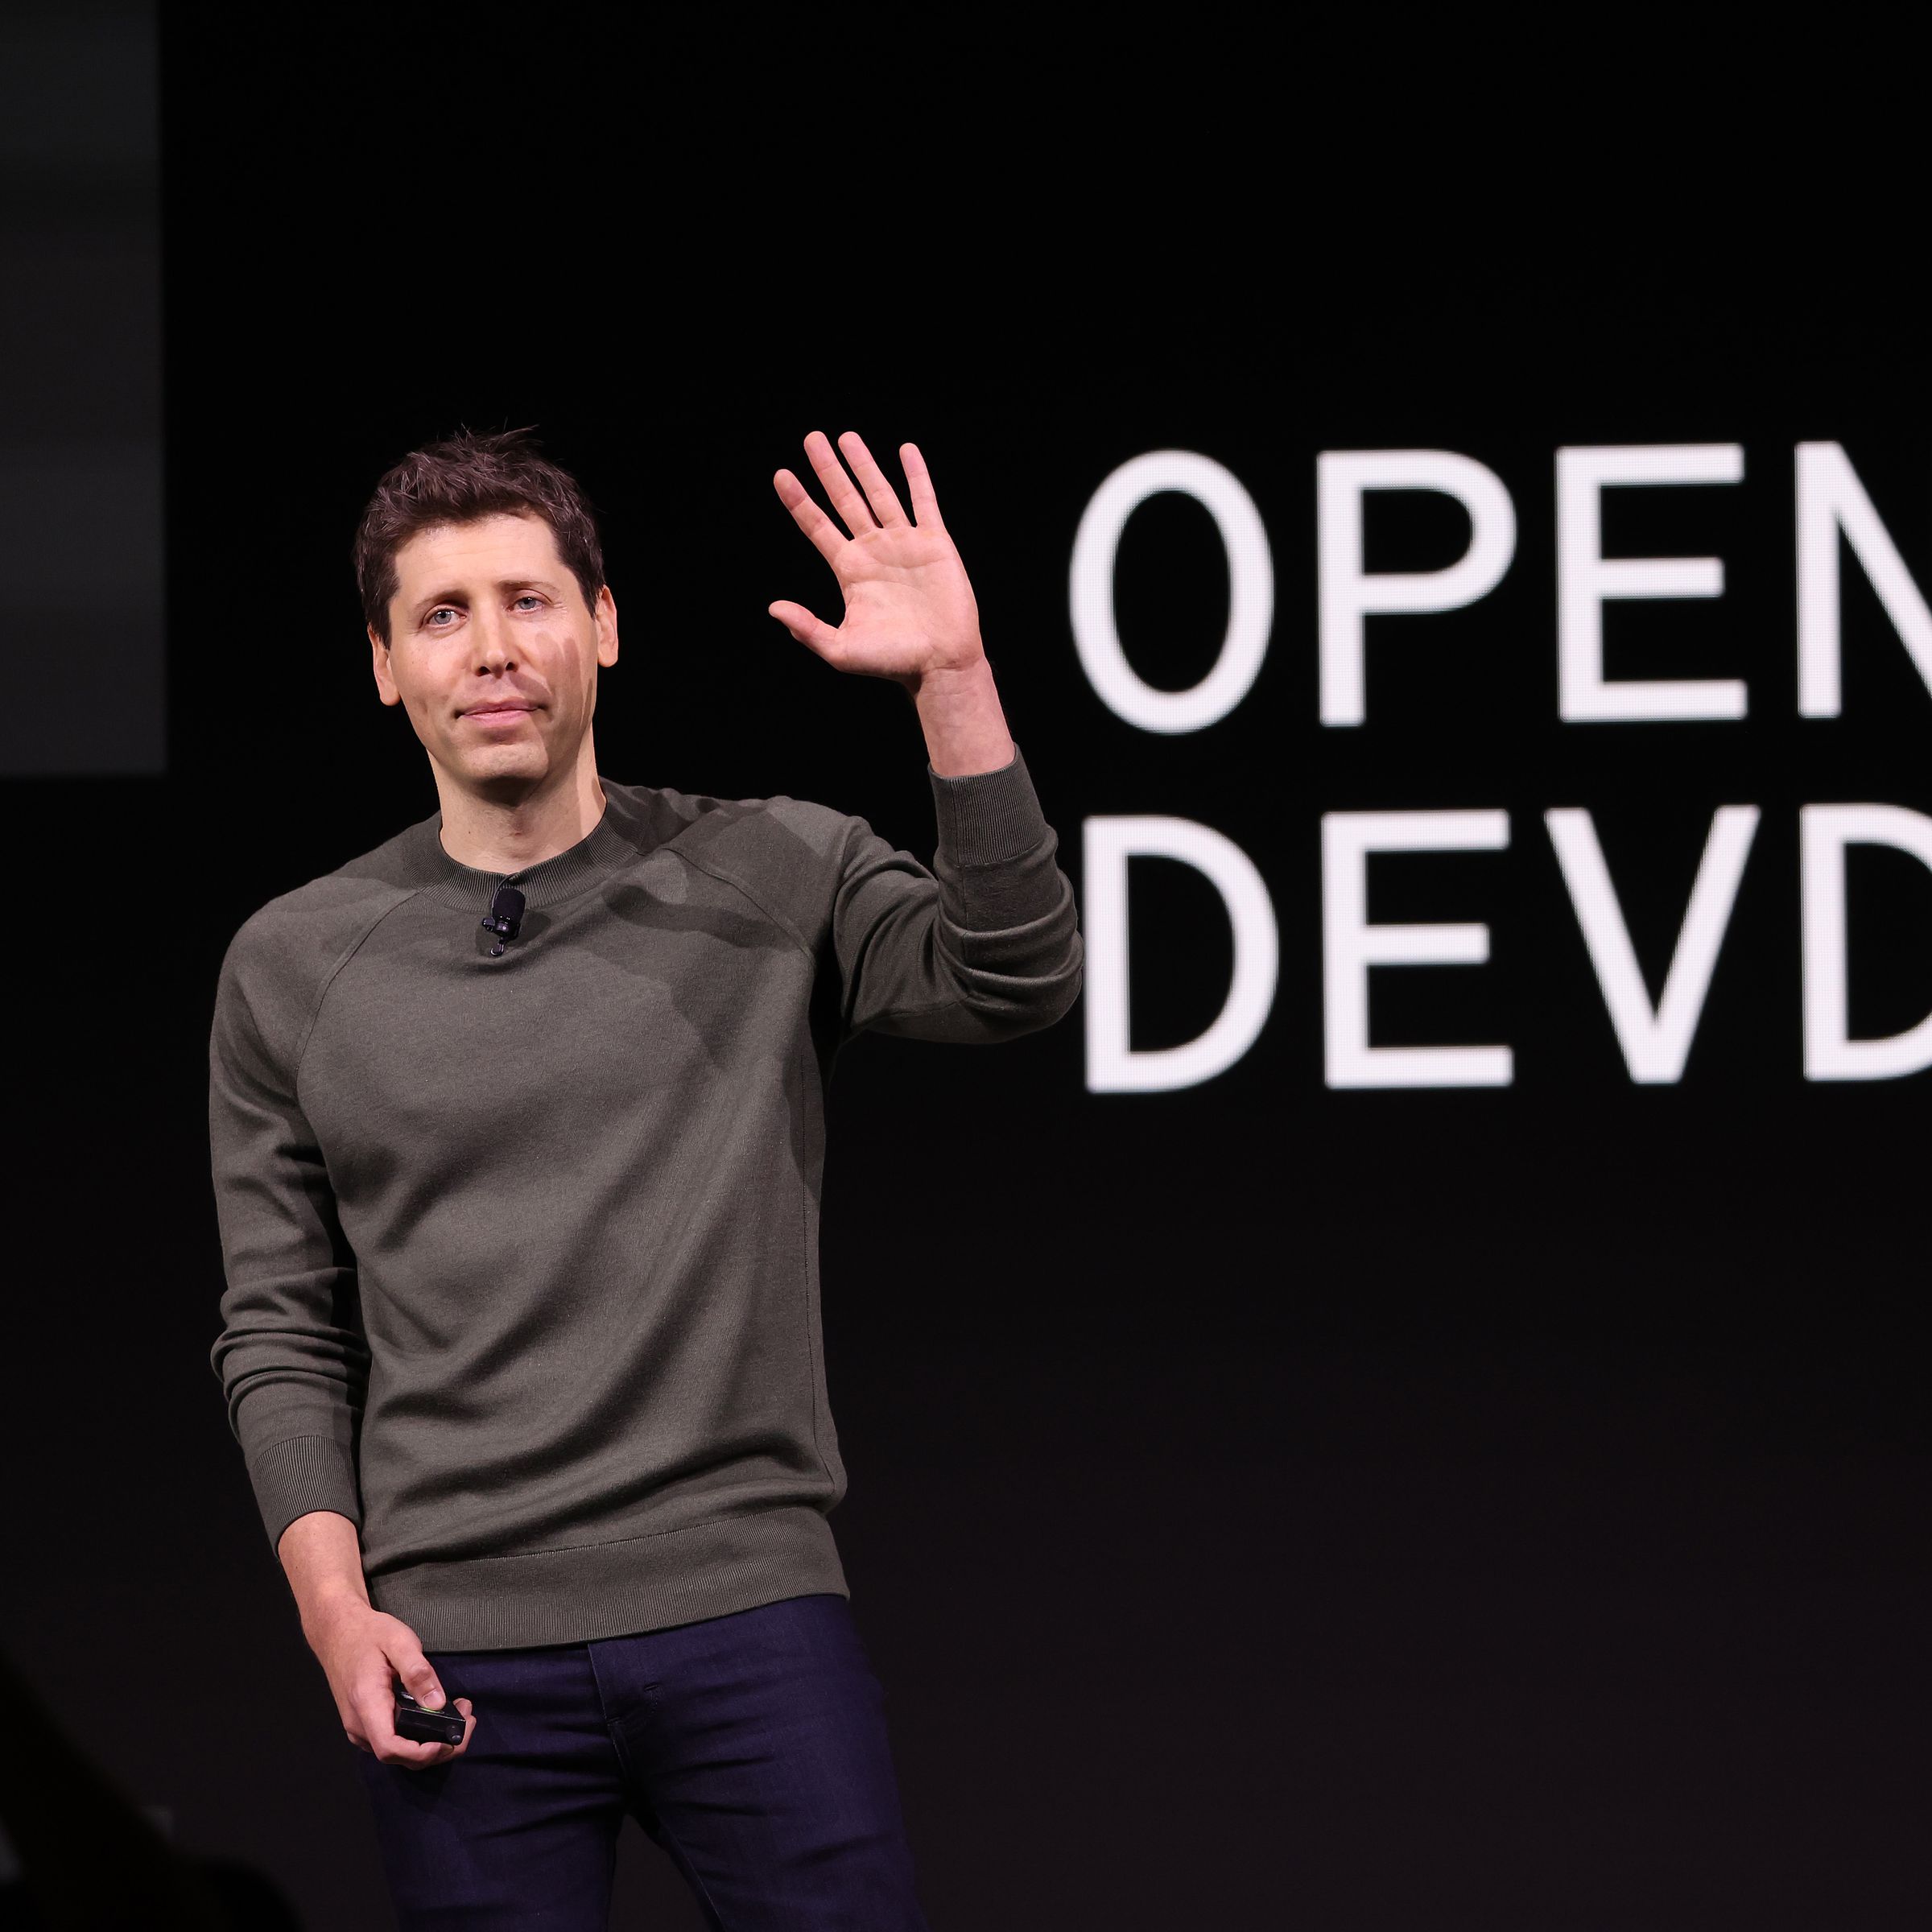 OpenAI Holds Its First Developer Conference